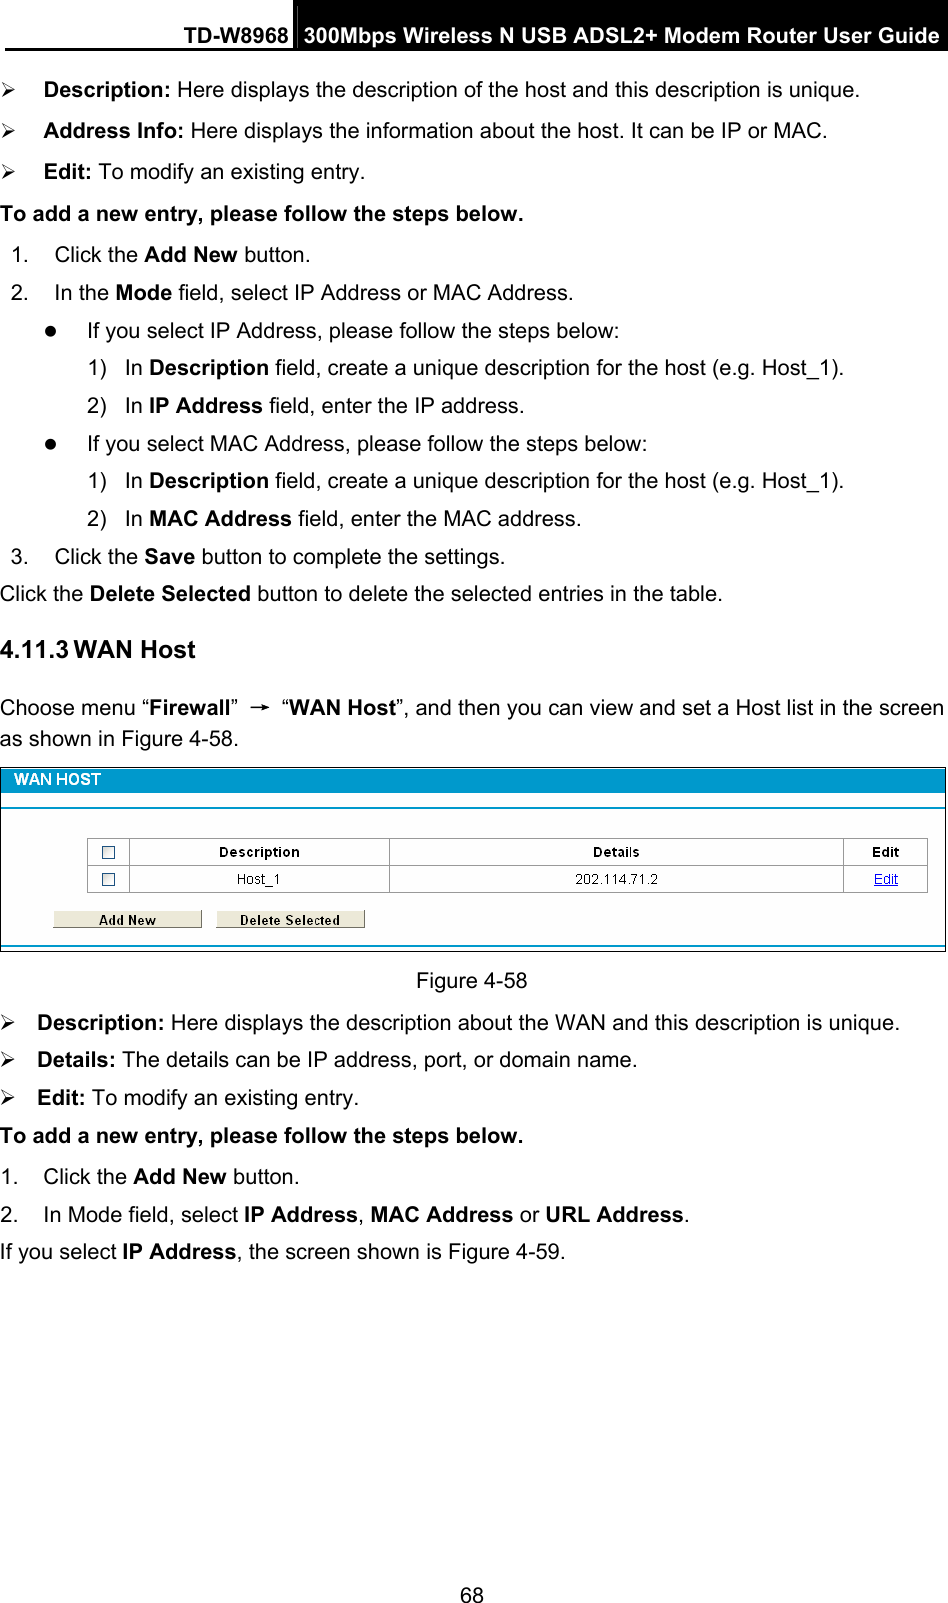 TD-W8968  300Mbps Wireless N USB ADSL2+ Modem Router User Guide 68 ¾ Description: Here displays the description of the host and this description is unique.   ¾ Address Info: Here displays the information about the host. It can be IP or MAC.   ¾ Edit: To modify an existing entry.   To add a new entry, please follow the steps below. 1. Click the Add New button. 2. In the Mode field, select IP Address or MAC Address. z If you select IP Address, please follow the steps below:   1) In Description field, create a unique description for the host (e.g. Host_1).   2) In IP Address field, enter the IP address. z If you select MAC Address, please follow the steps below:   1) In Description field, create a unique description for the host (e.g. Host_1). 2) In MAC Address field, enter the MAC address. 3. Click the Save button to complete the settings. Click the Delete Selected button to delete the selected entries in the table. 4.11.3 WAN Host Choose menu “Firewall” → “WAN Host”, and then you can view and set a Host list in the screen as shown in Figure 4-58.  Figure 4-58 ¾ Description: Here displays the description about the WAN and this description is unique.   ¾ Details: The details can be IP address, port, or domain name.   ¾ Edit: To modify an existing entry.   To add a new entry, please follow the steps below. 1. Click the Add New button. 2.  In Mode field, select IP Address, MAC Address or URL Address. If you select IP Address, the screen shown is Figure 4-59. 